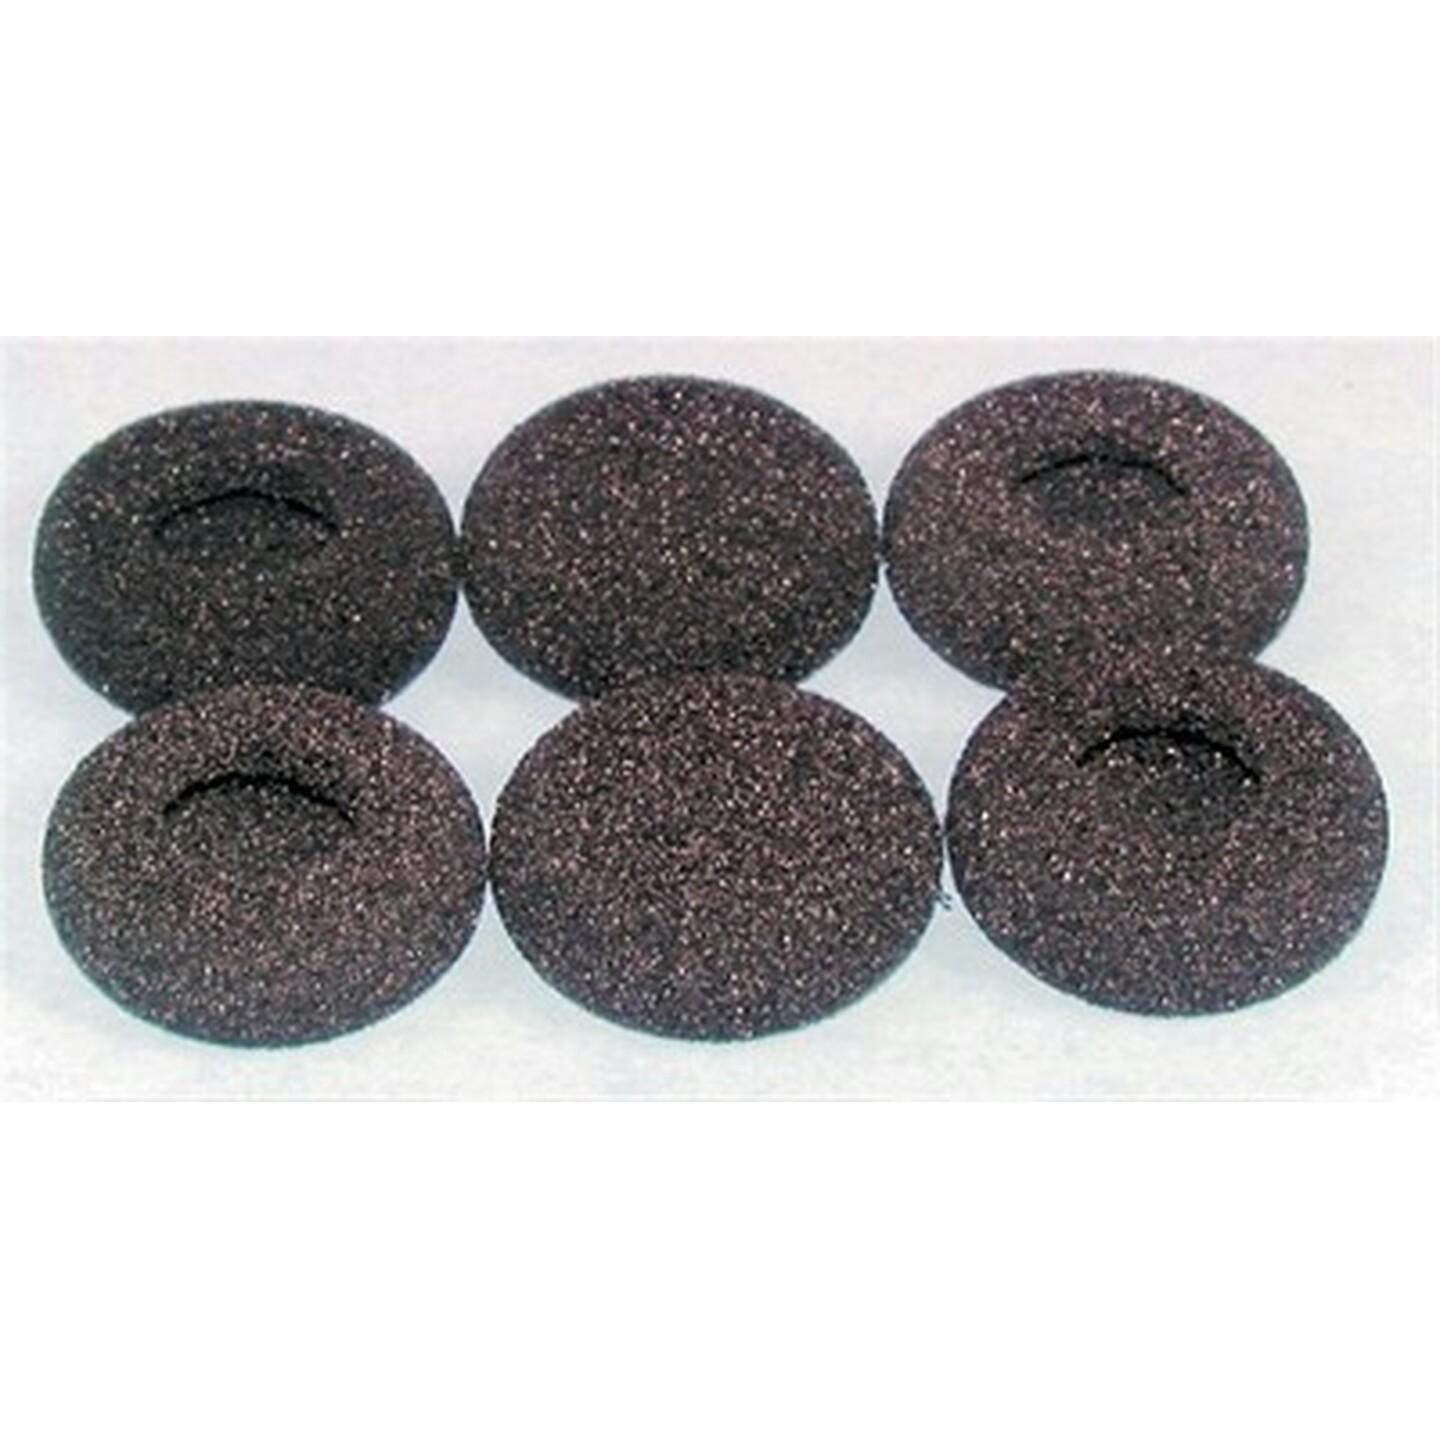 Large Replacement Earphone Pads - Pk.6